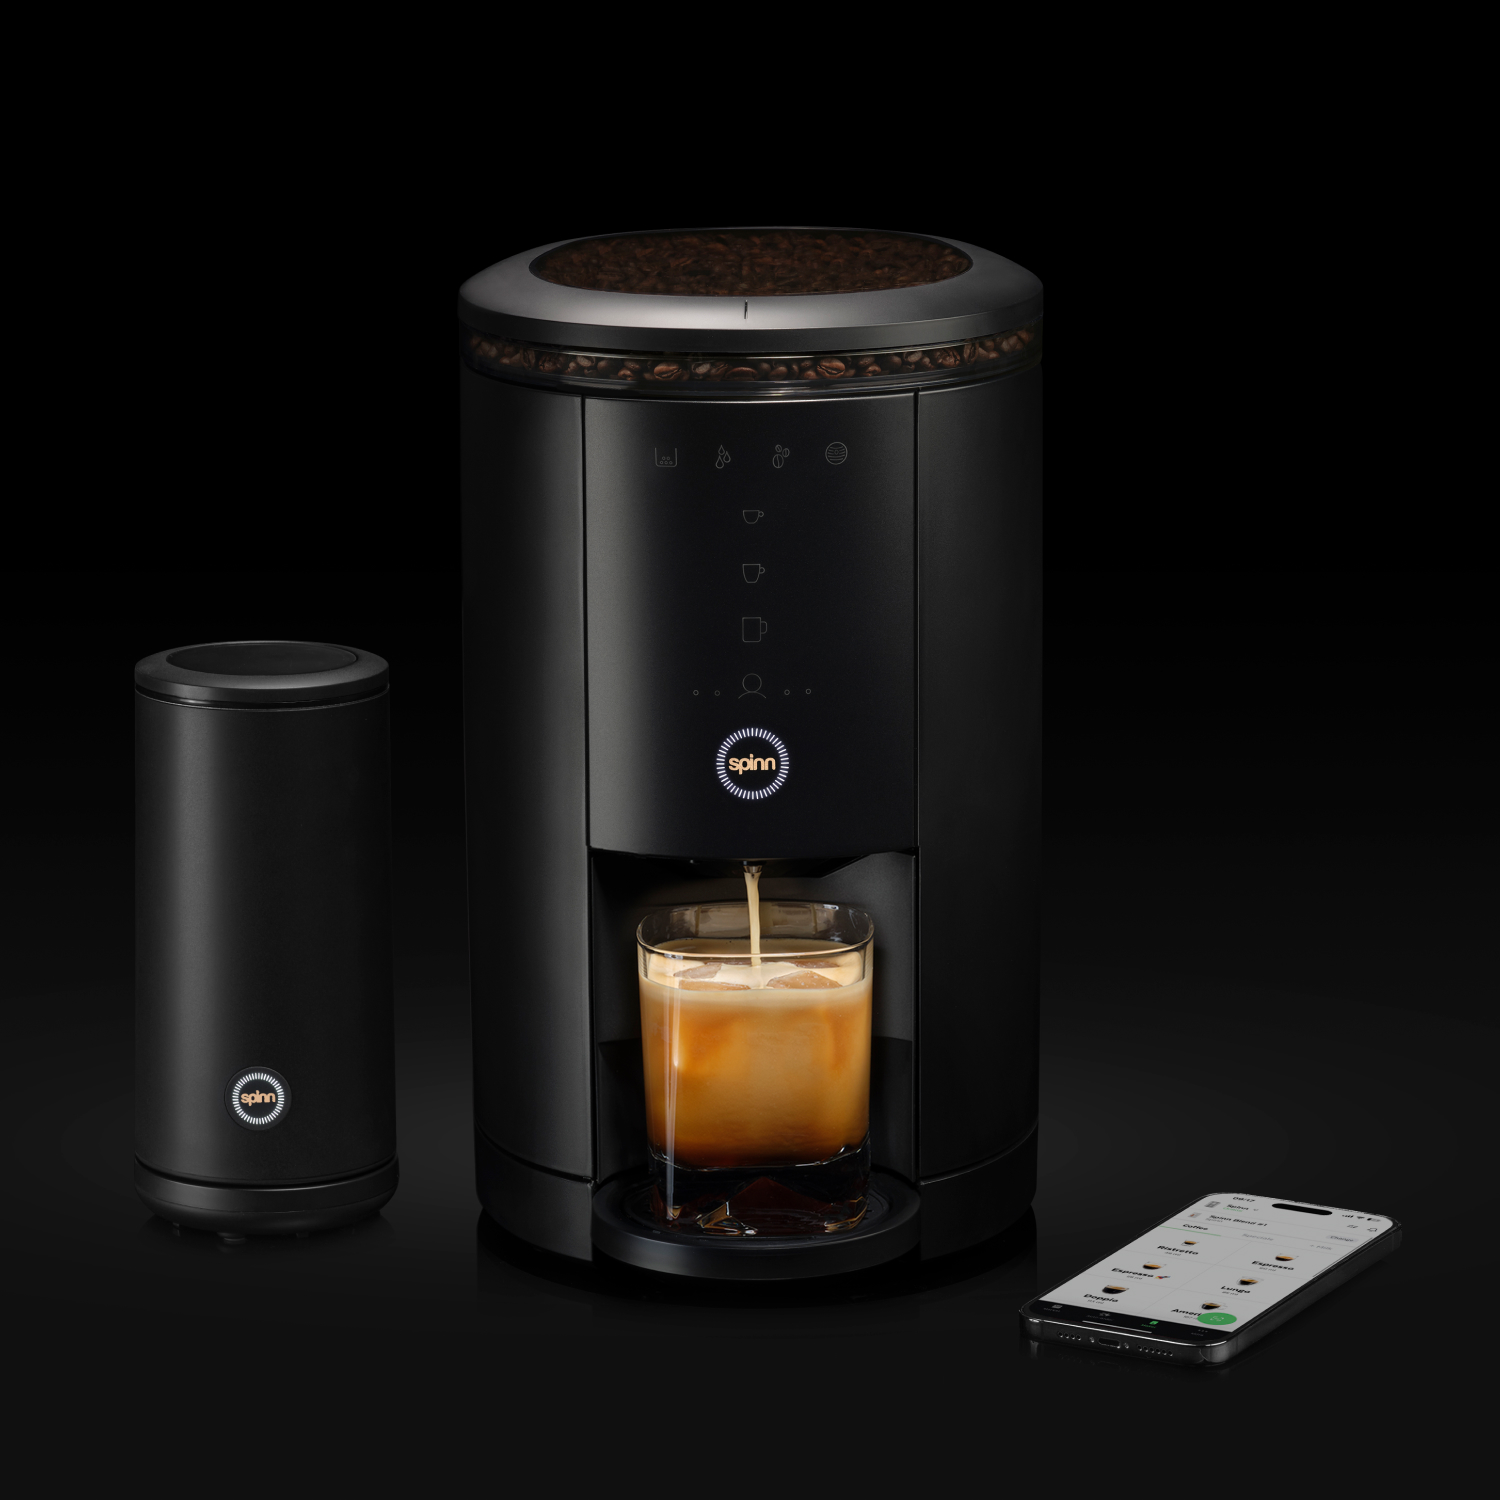 Spinn, the coffee maker for people who are too lazy to learn about